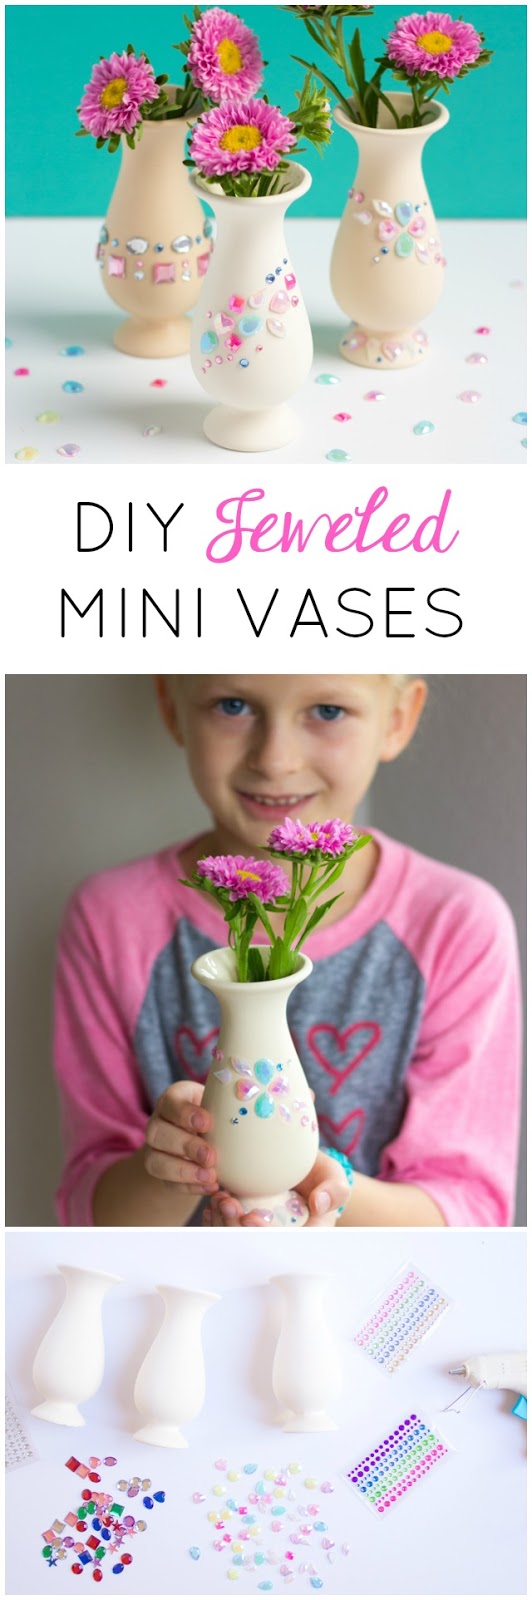 Decorate vases with peel-and-stick rhinestone jewels for a simple kids craft!